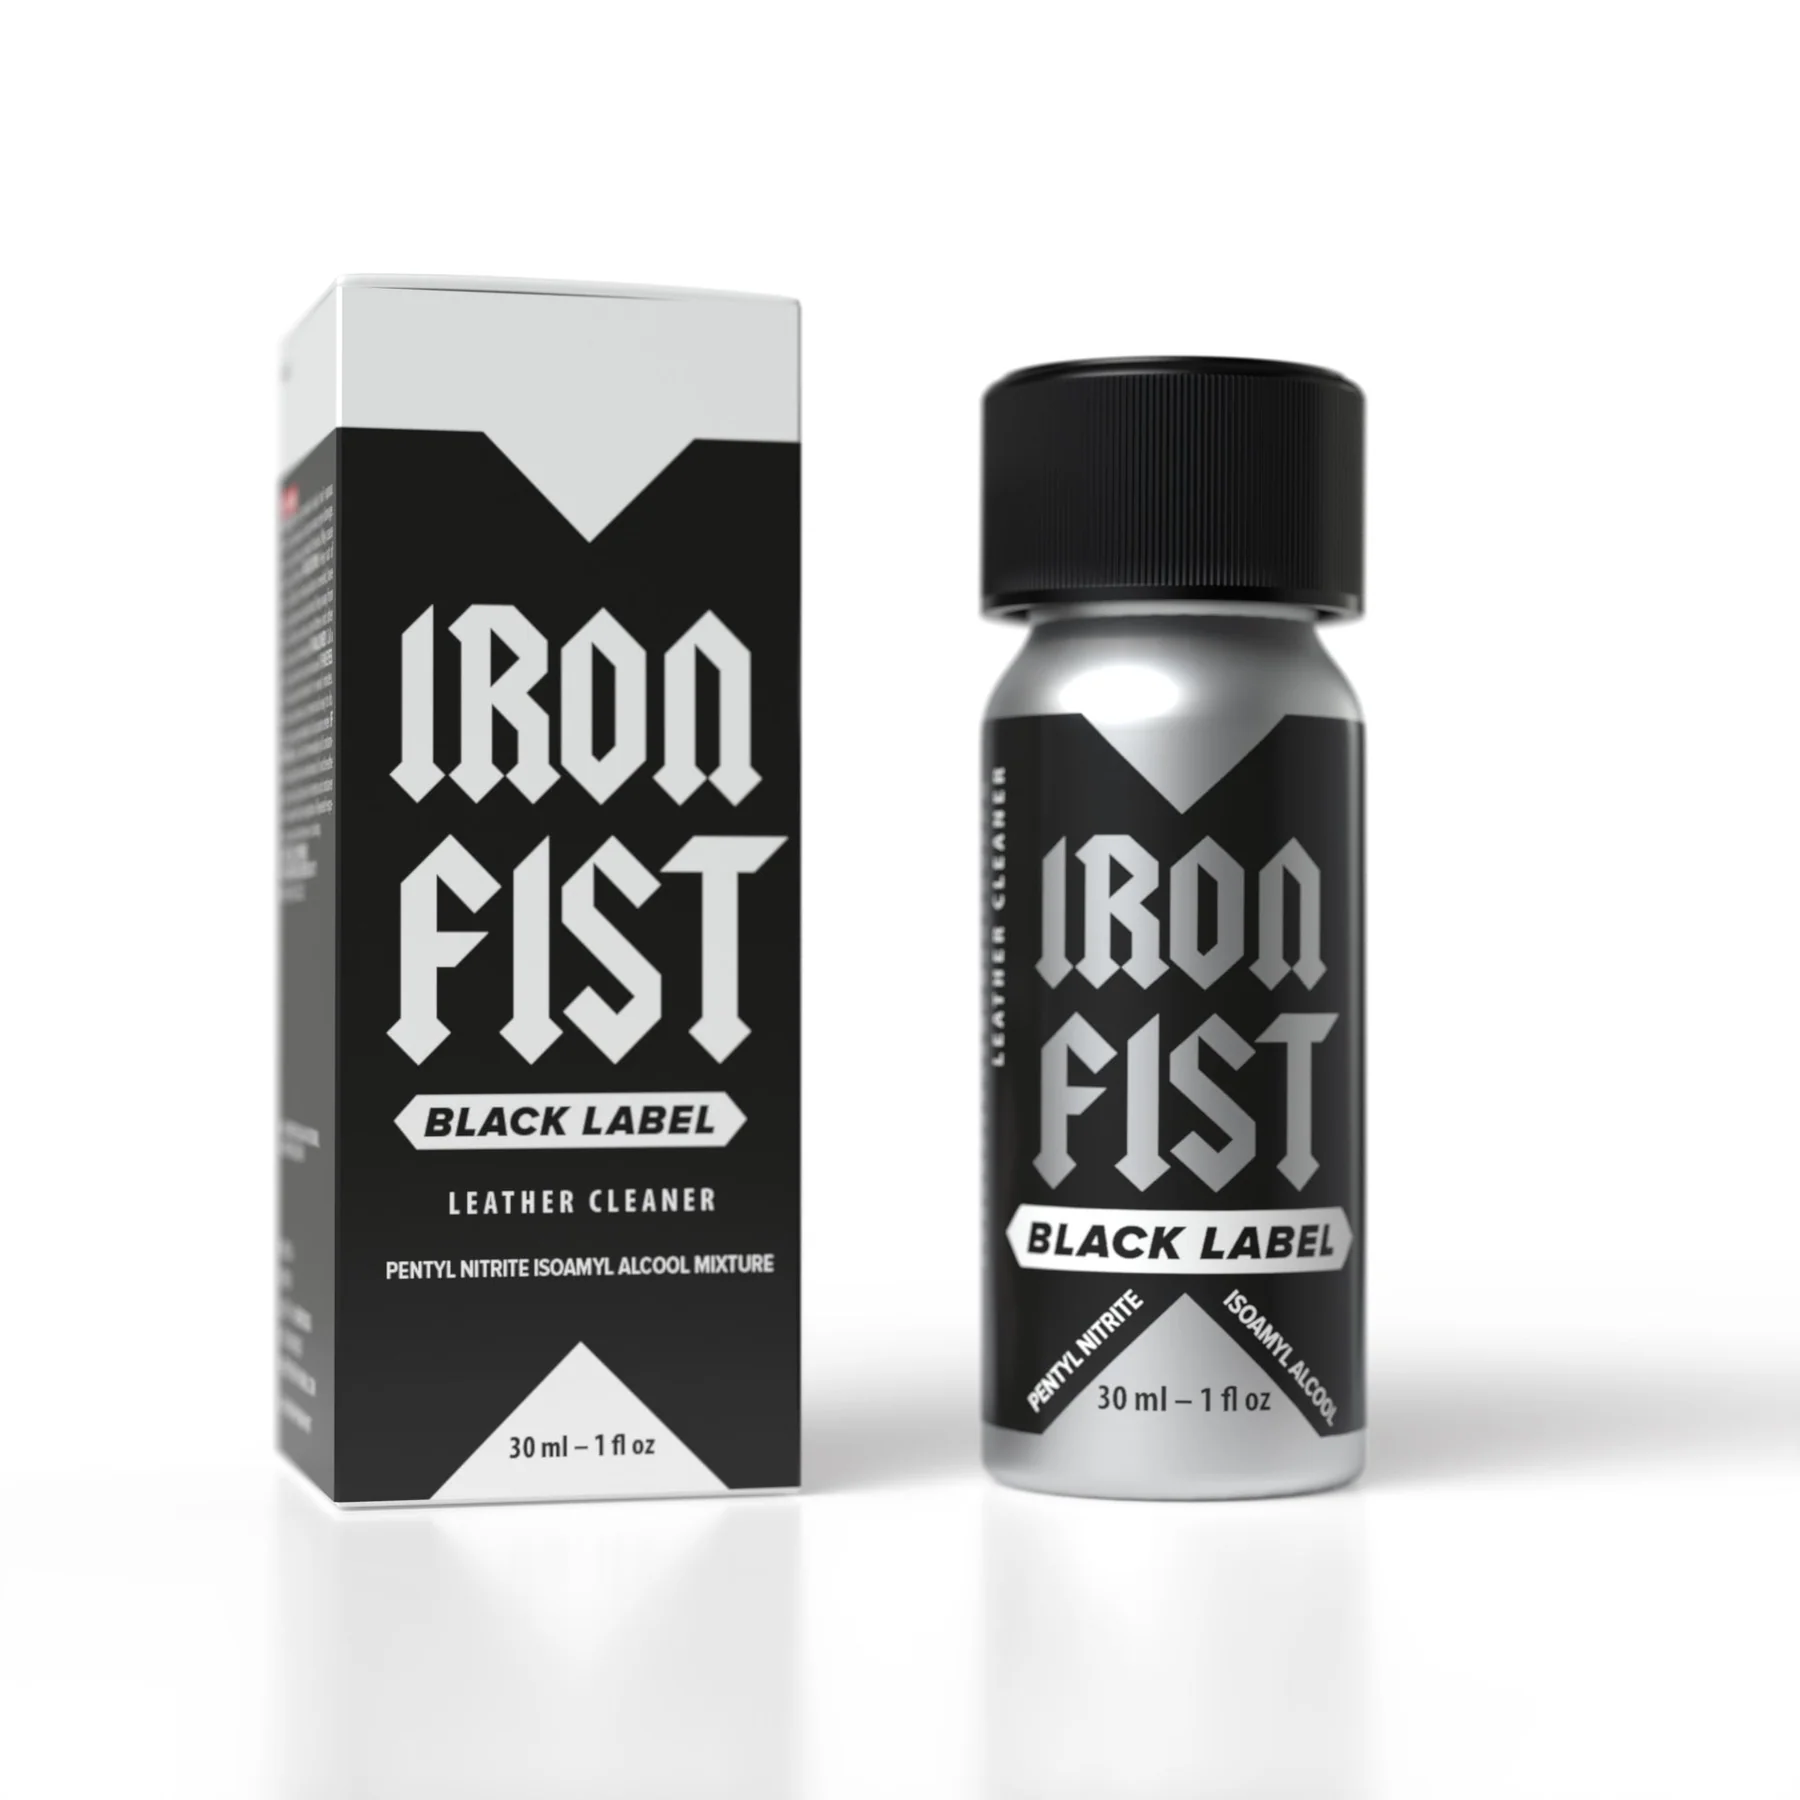 Iron Fist Black Label Pentyl 24ml leather cleaner: premium care for your leather goods, neatly packed in a bottle with an accompanying stylish box.